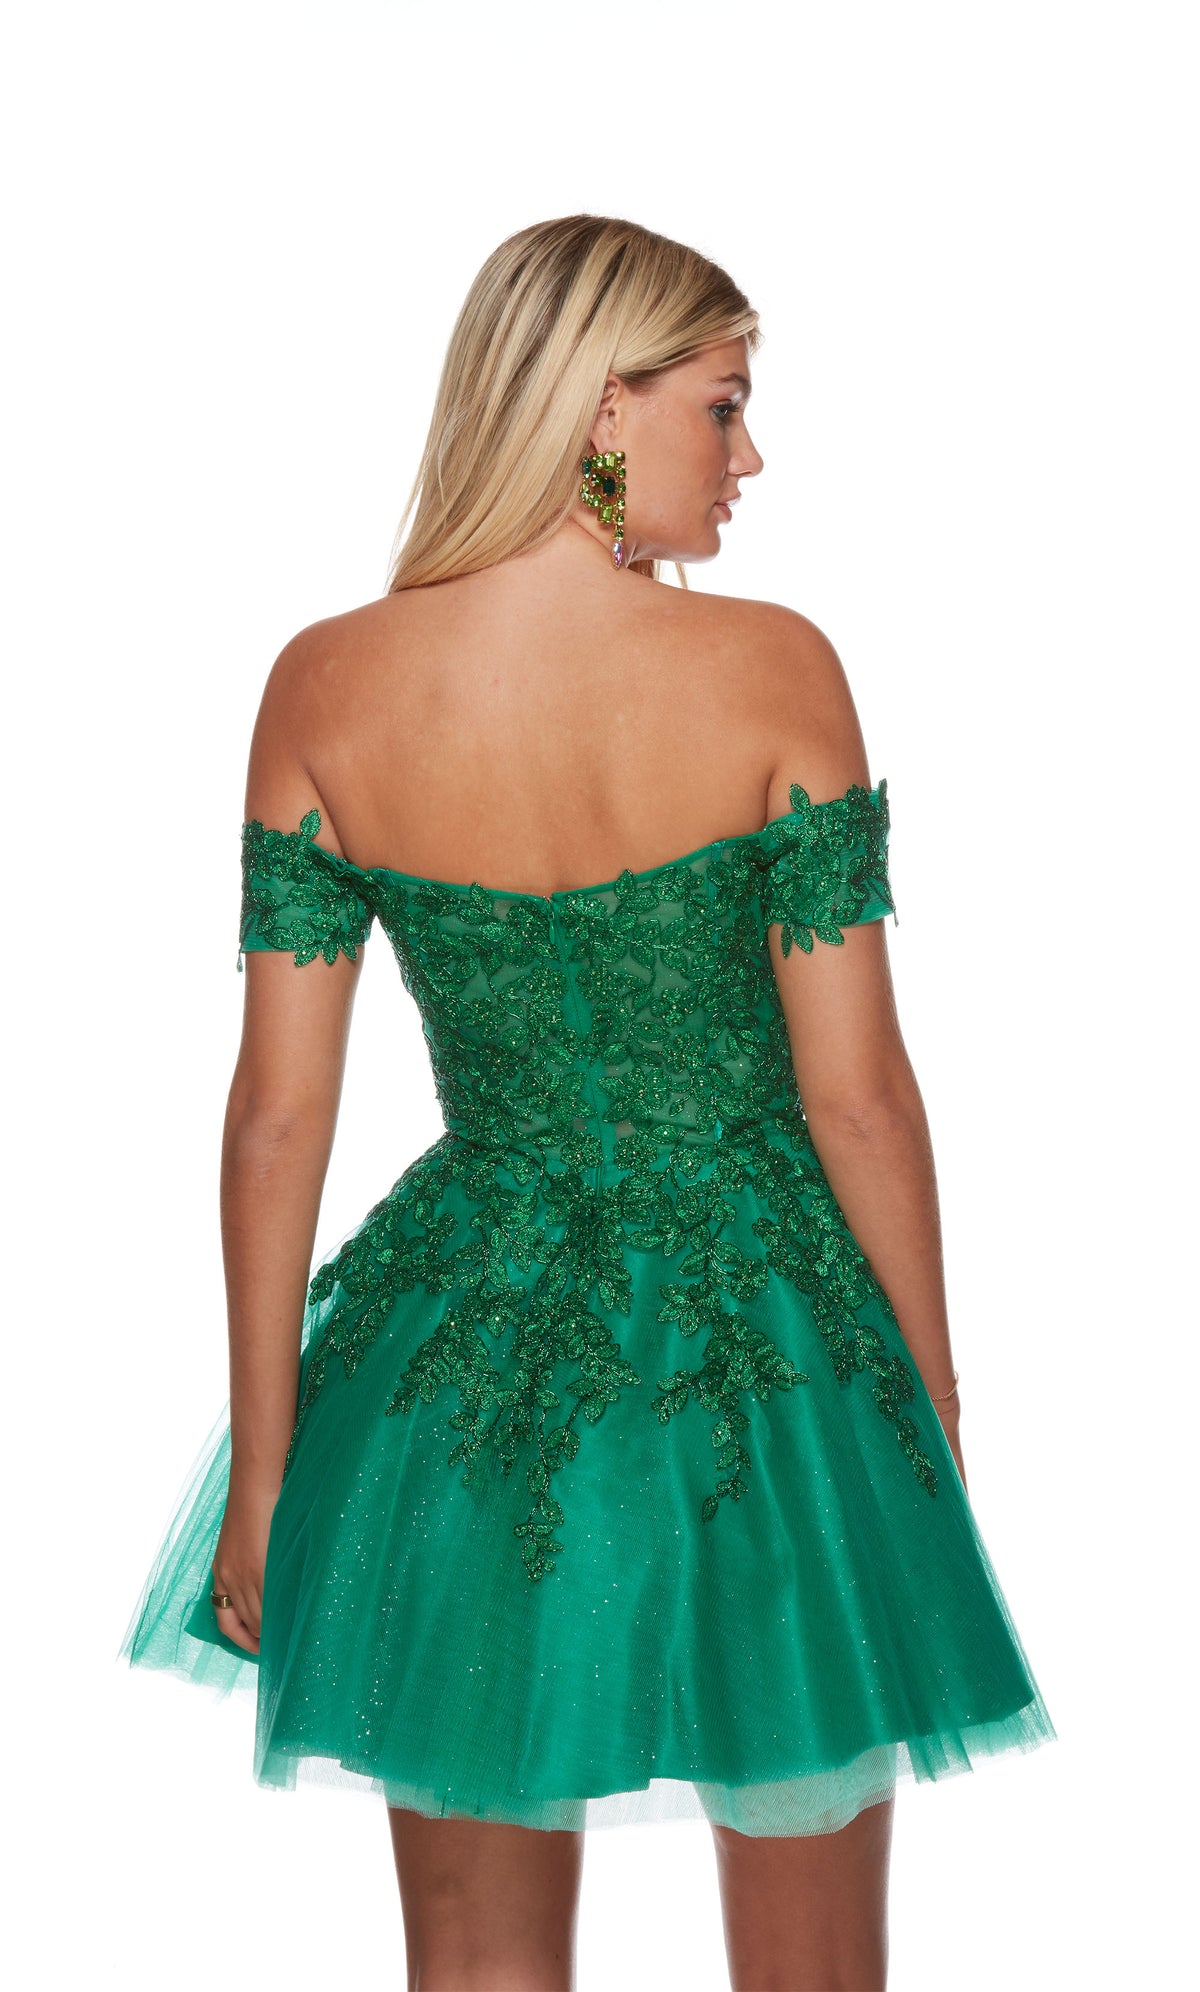 A playful emerald green short homecoming dress featuring an off the shoulder neckline, a sheer bodice adorned with floral lace appliques, and a glitter-tulle skirt.